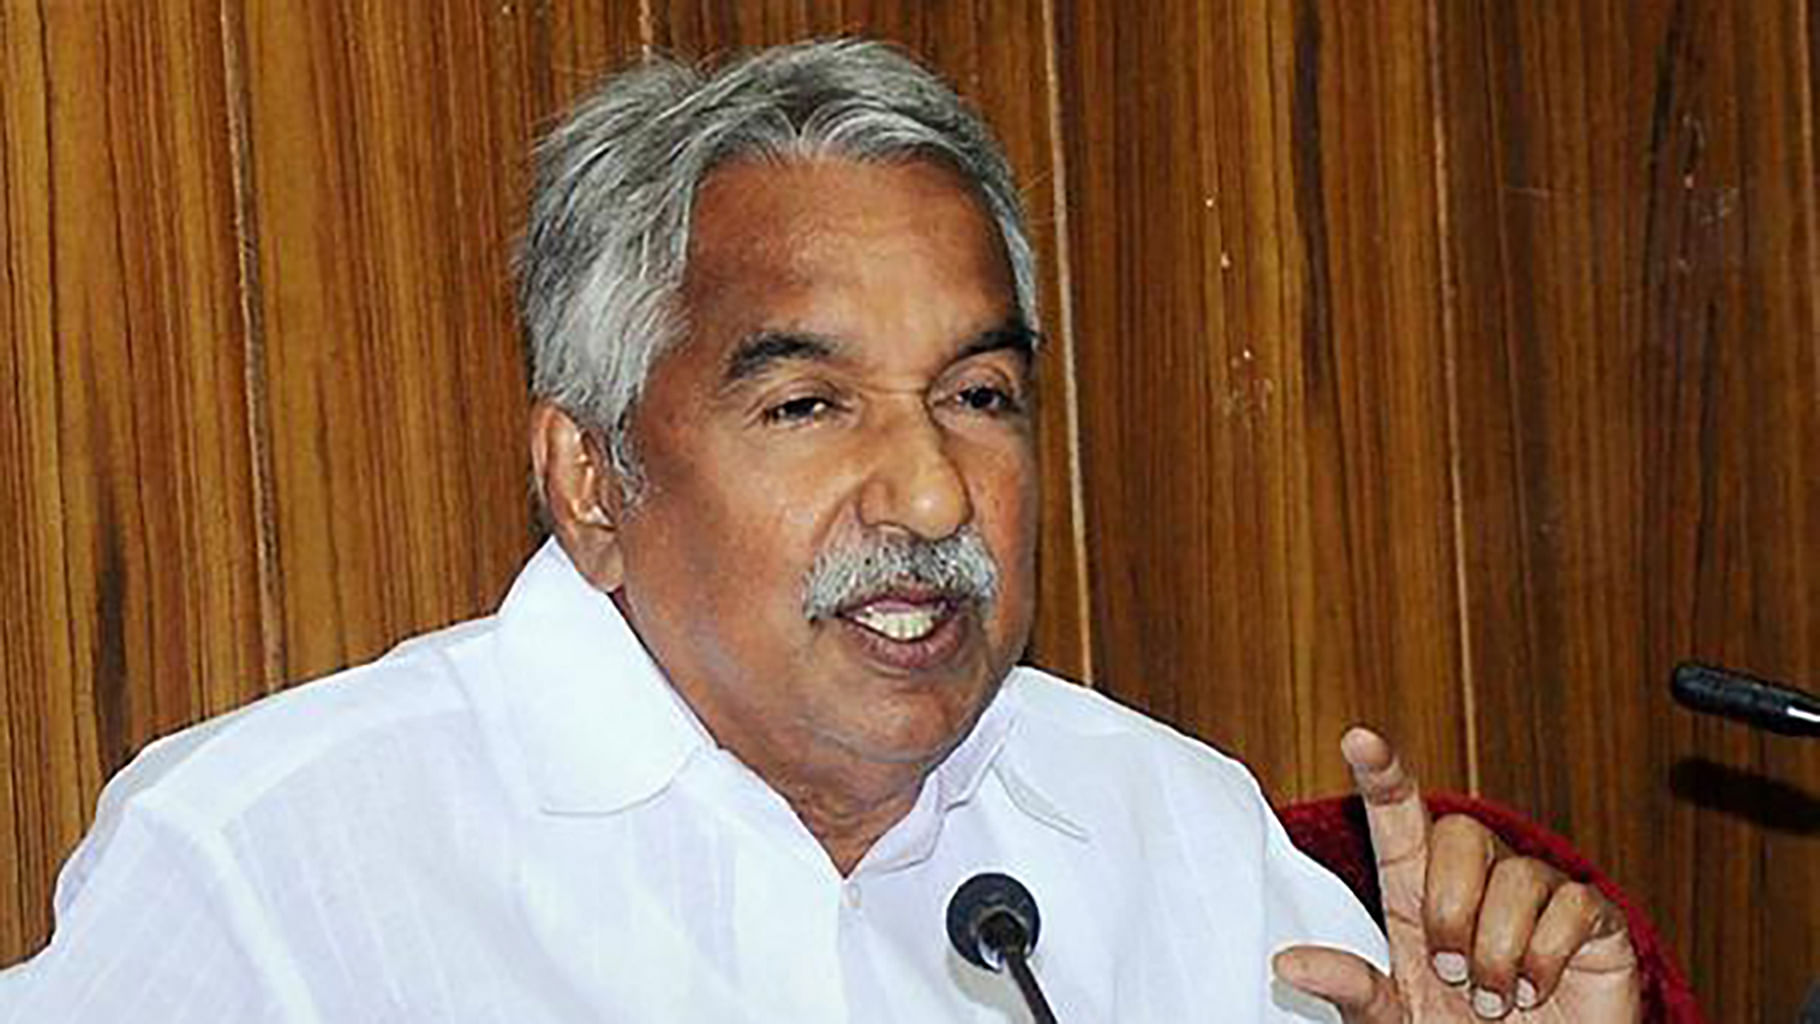 Kerala Chief Minister Oommen Chandy today visited the ailing mother of the victim admitted to a hospital in Perumbavoor. (Photo: PTI)